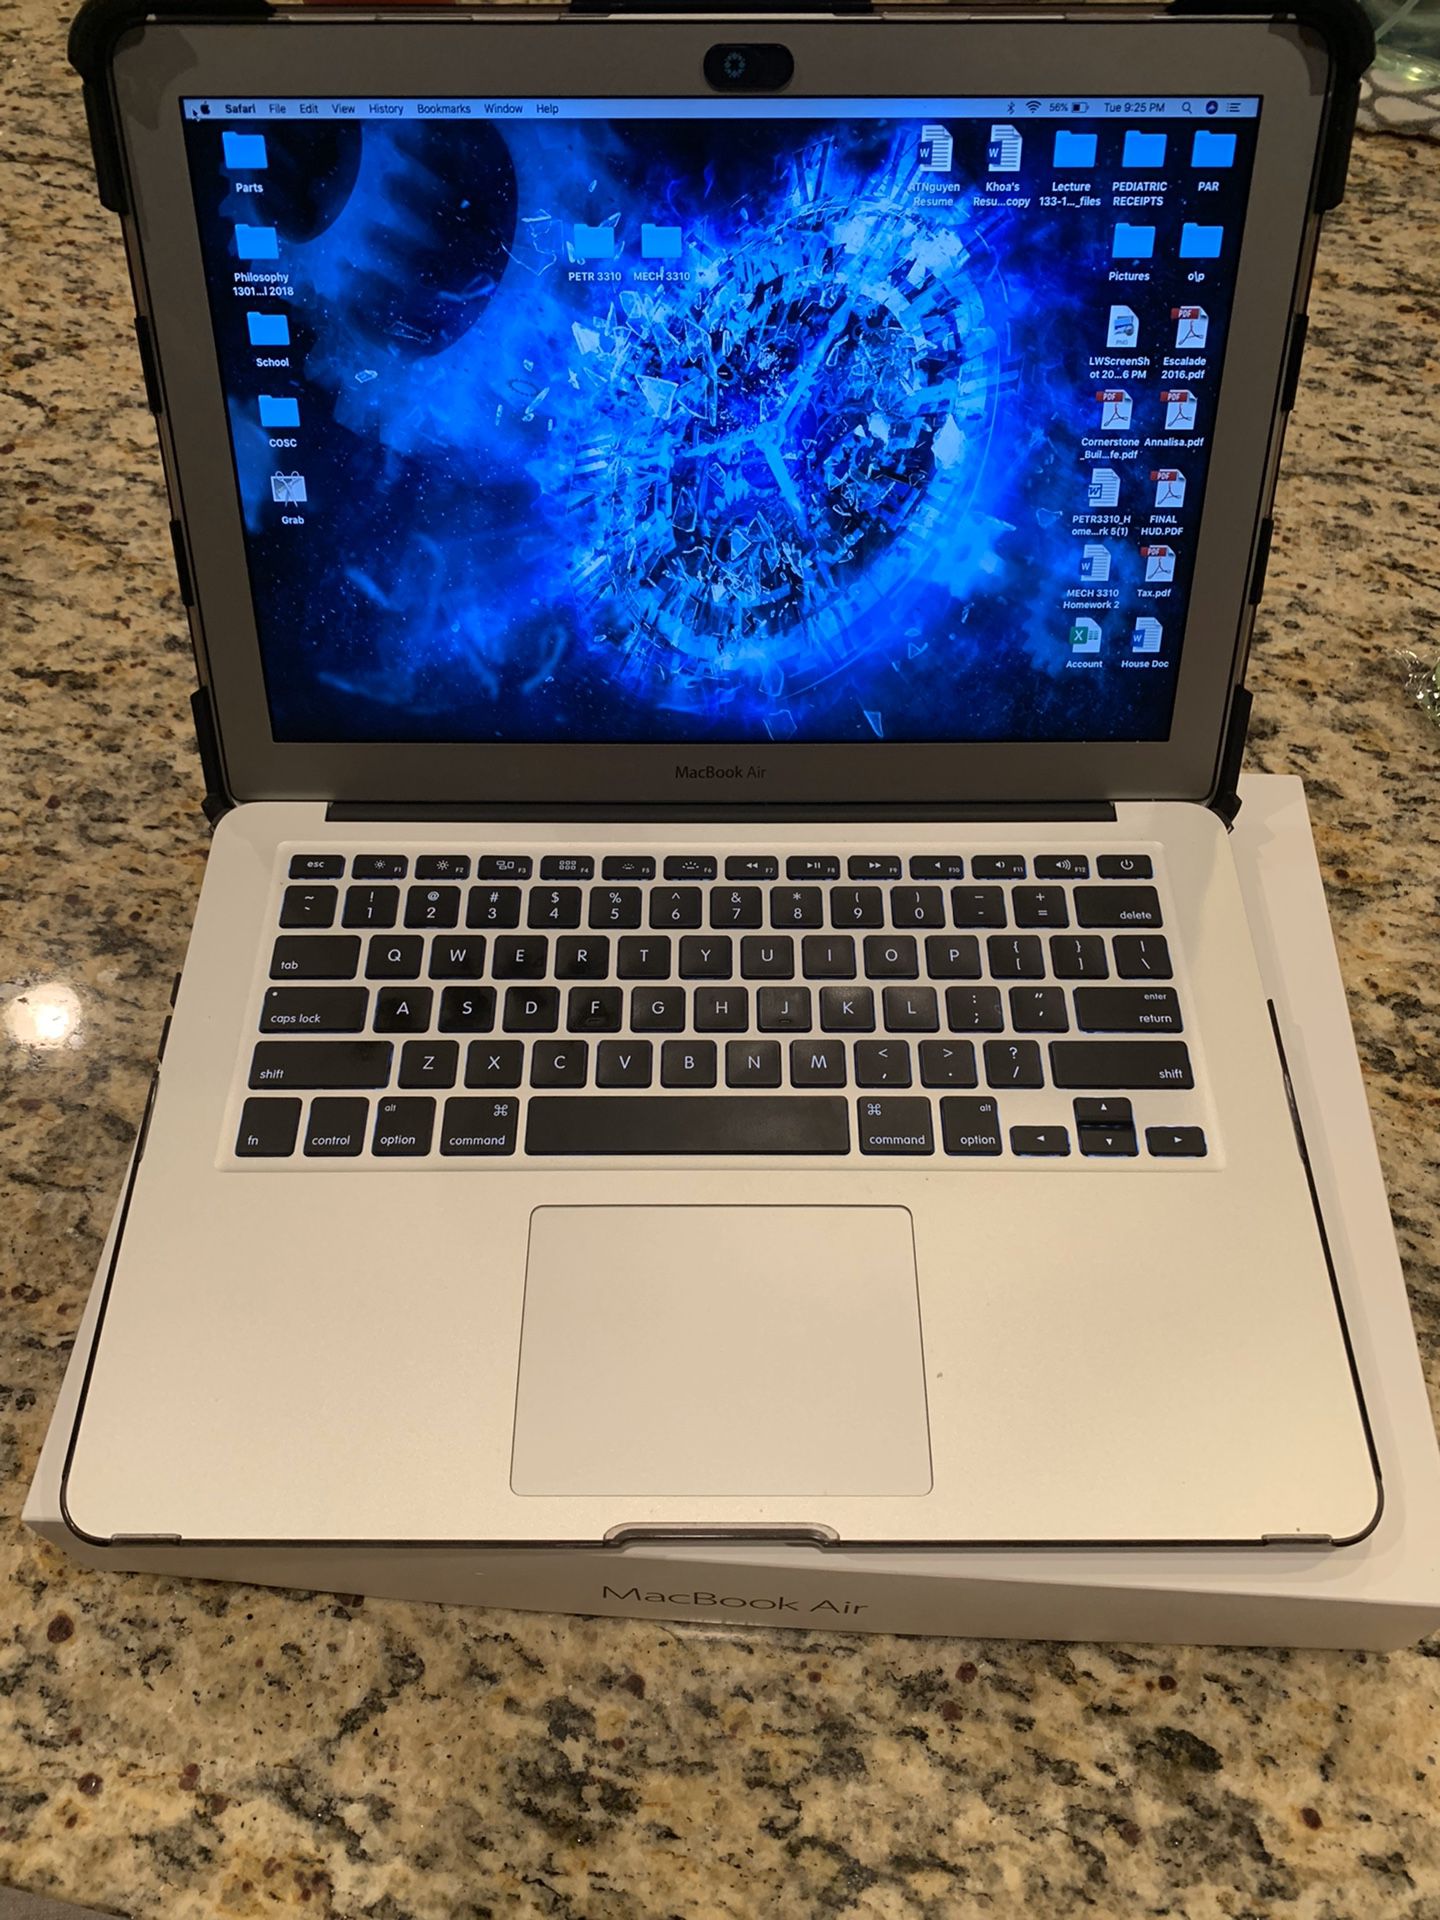 13.3in MacBook Air pristine condition with case, box, charging cable